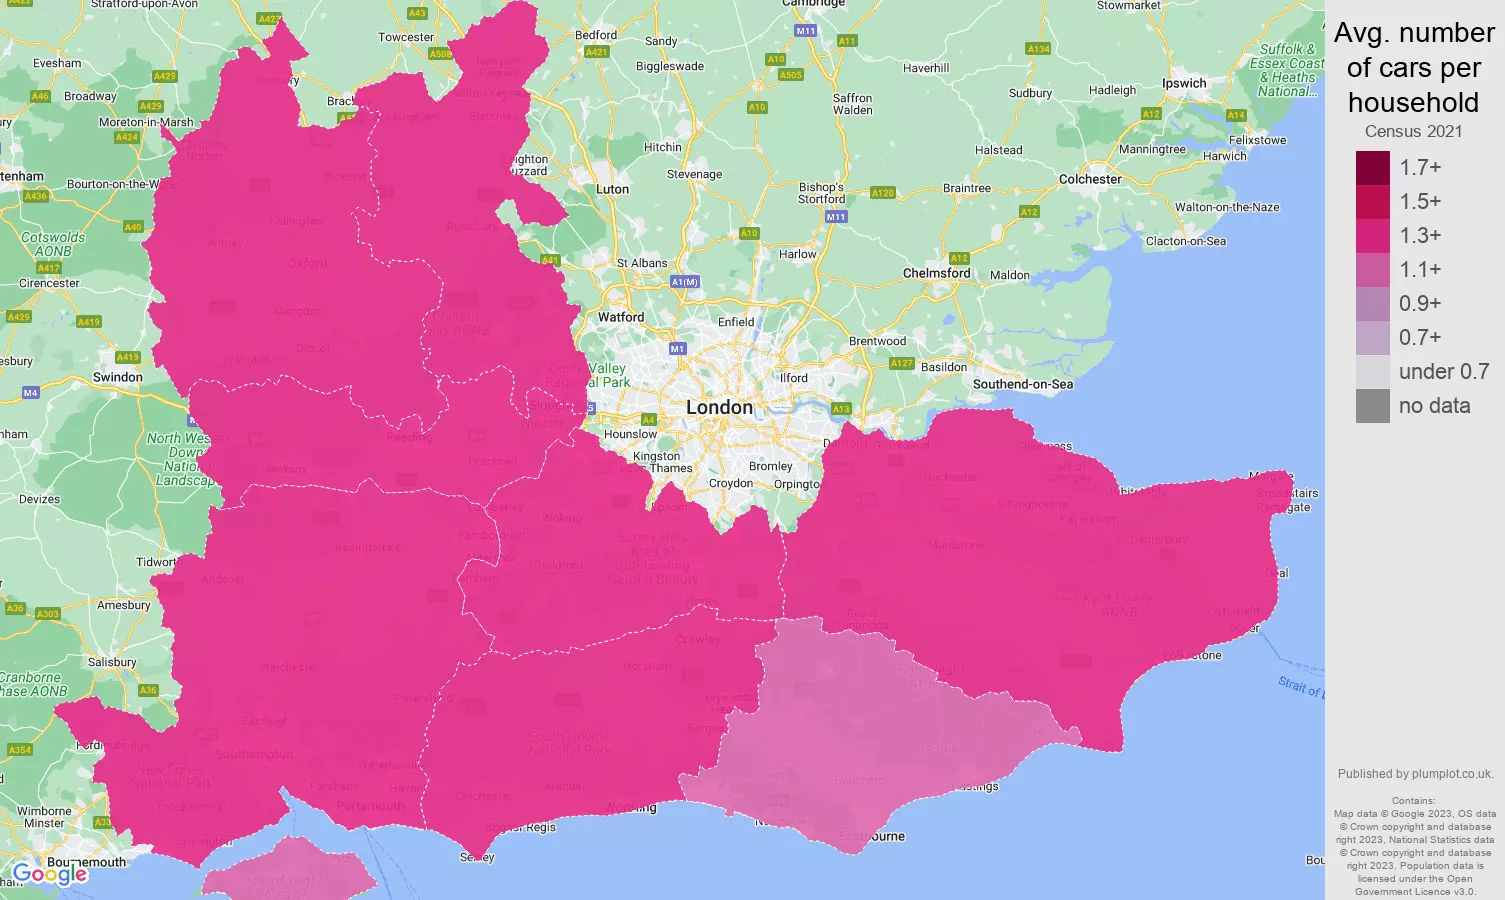 South East cars per household map